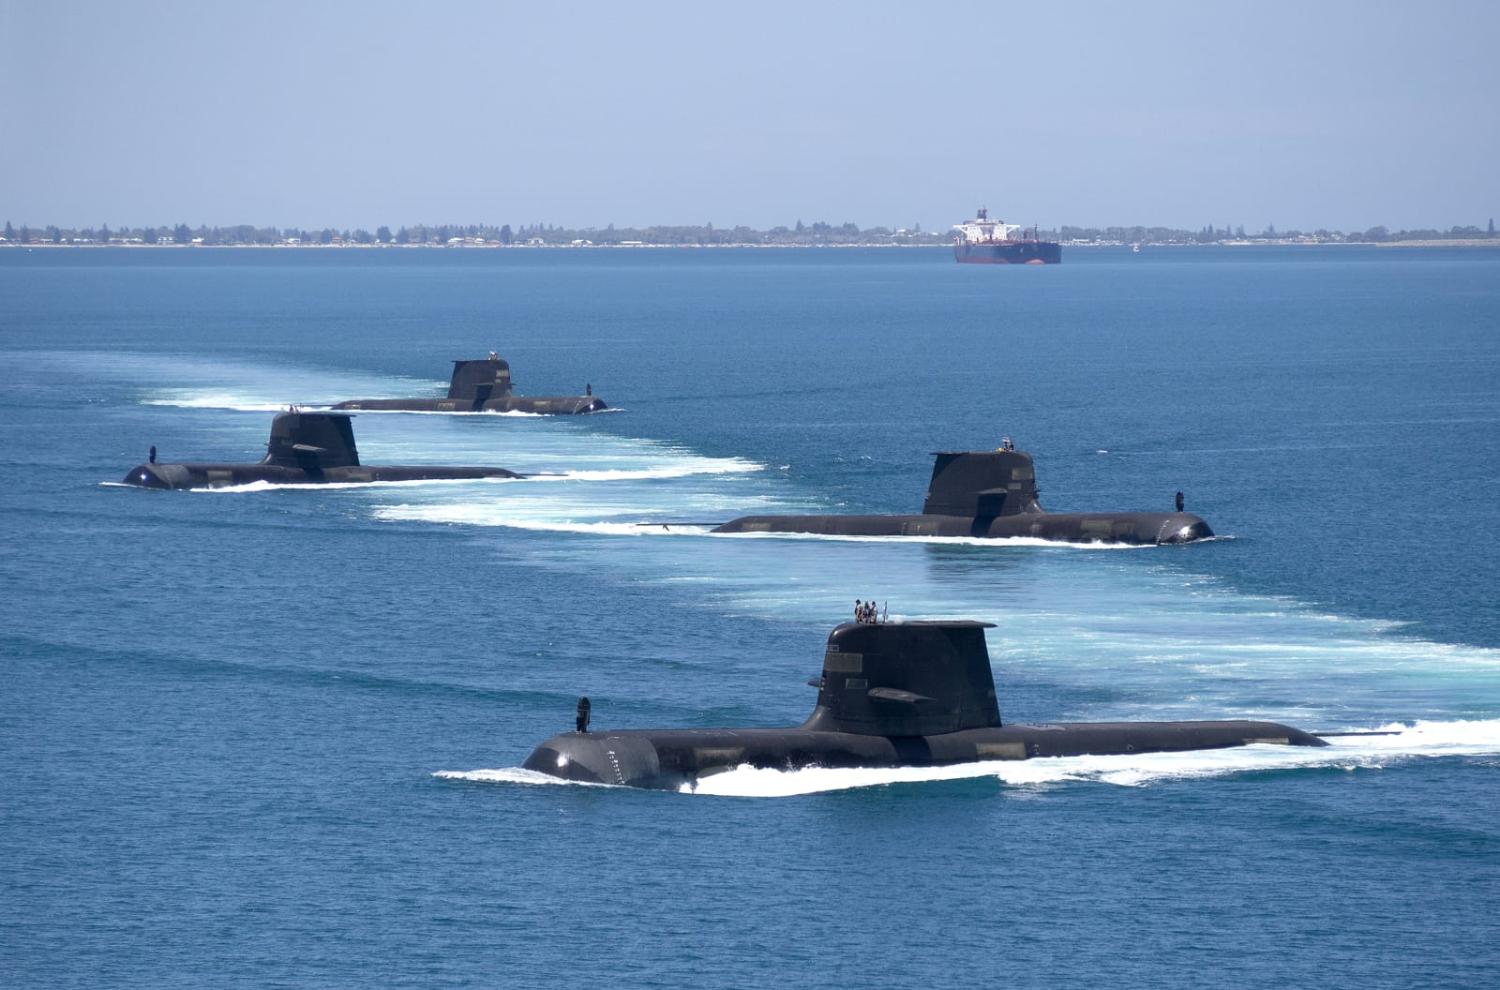 Australian Collins class submarines transiting through Cockburn Sound, Western Australia, which will be an expanded base for the new nuclear-powered boats (Chris Prescott/Defence Department)